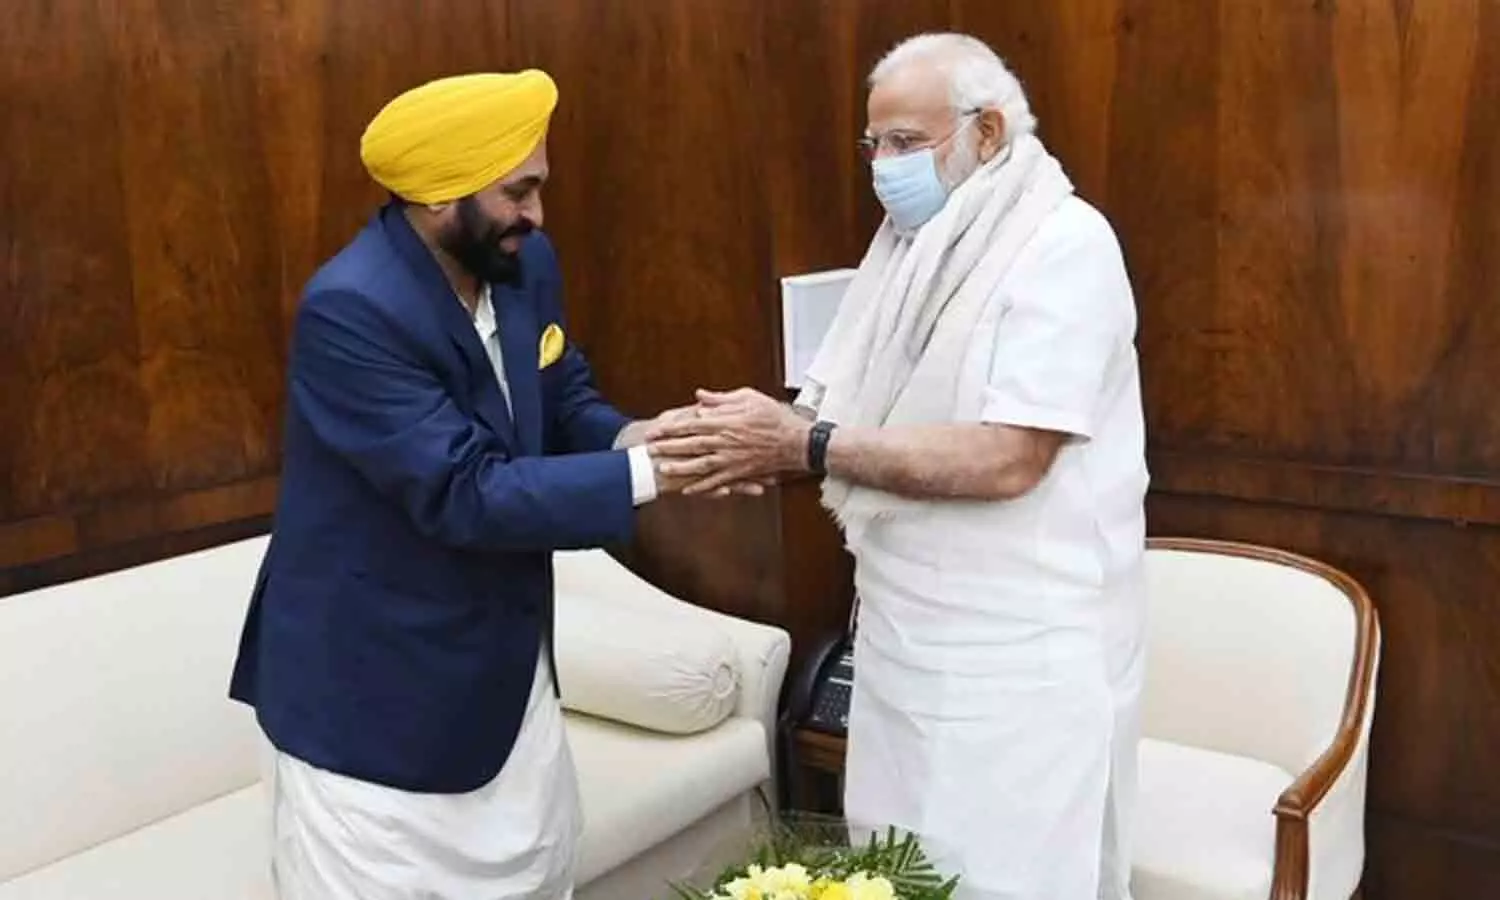 Punjab Chief Minister Bhagwant Mann reached Delhi, met PM Modi and asked for financial help of Rs 50000 crore every year